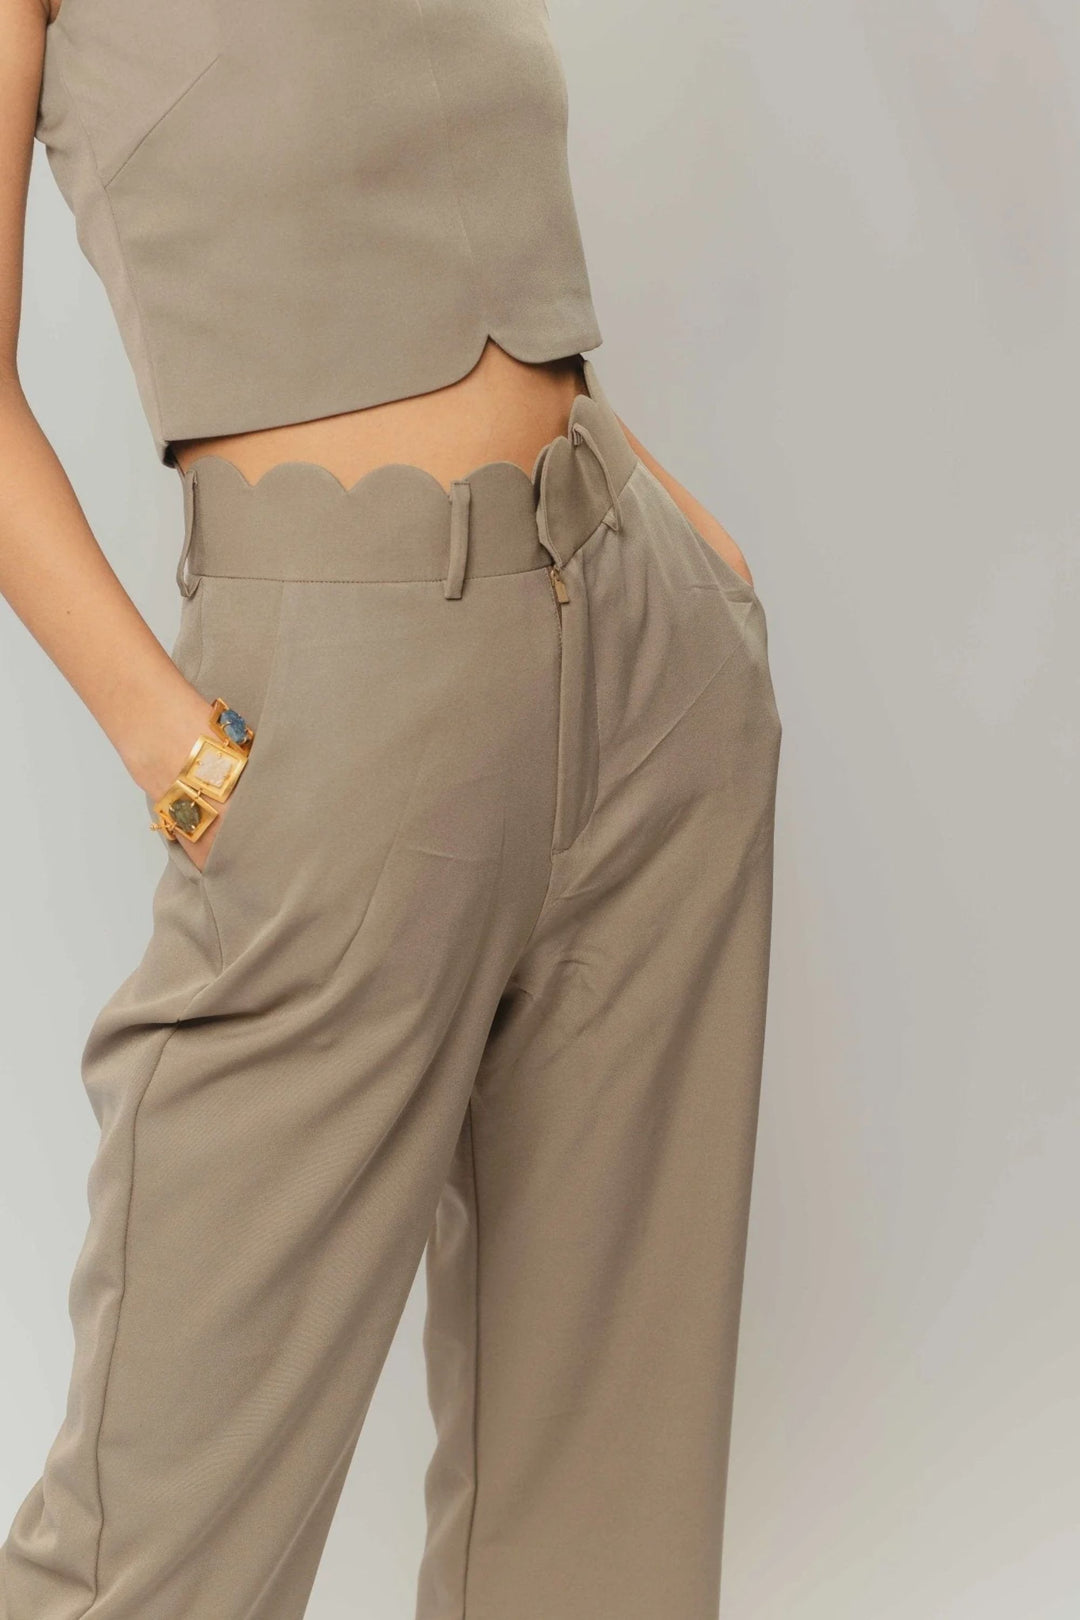 The Scallop Trousers in Bronco